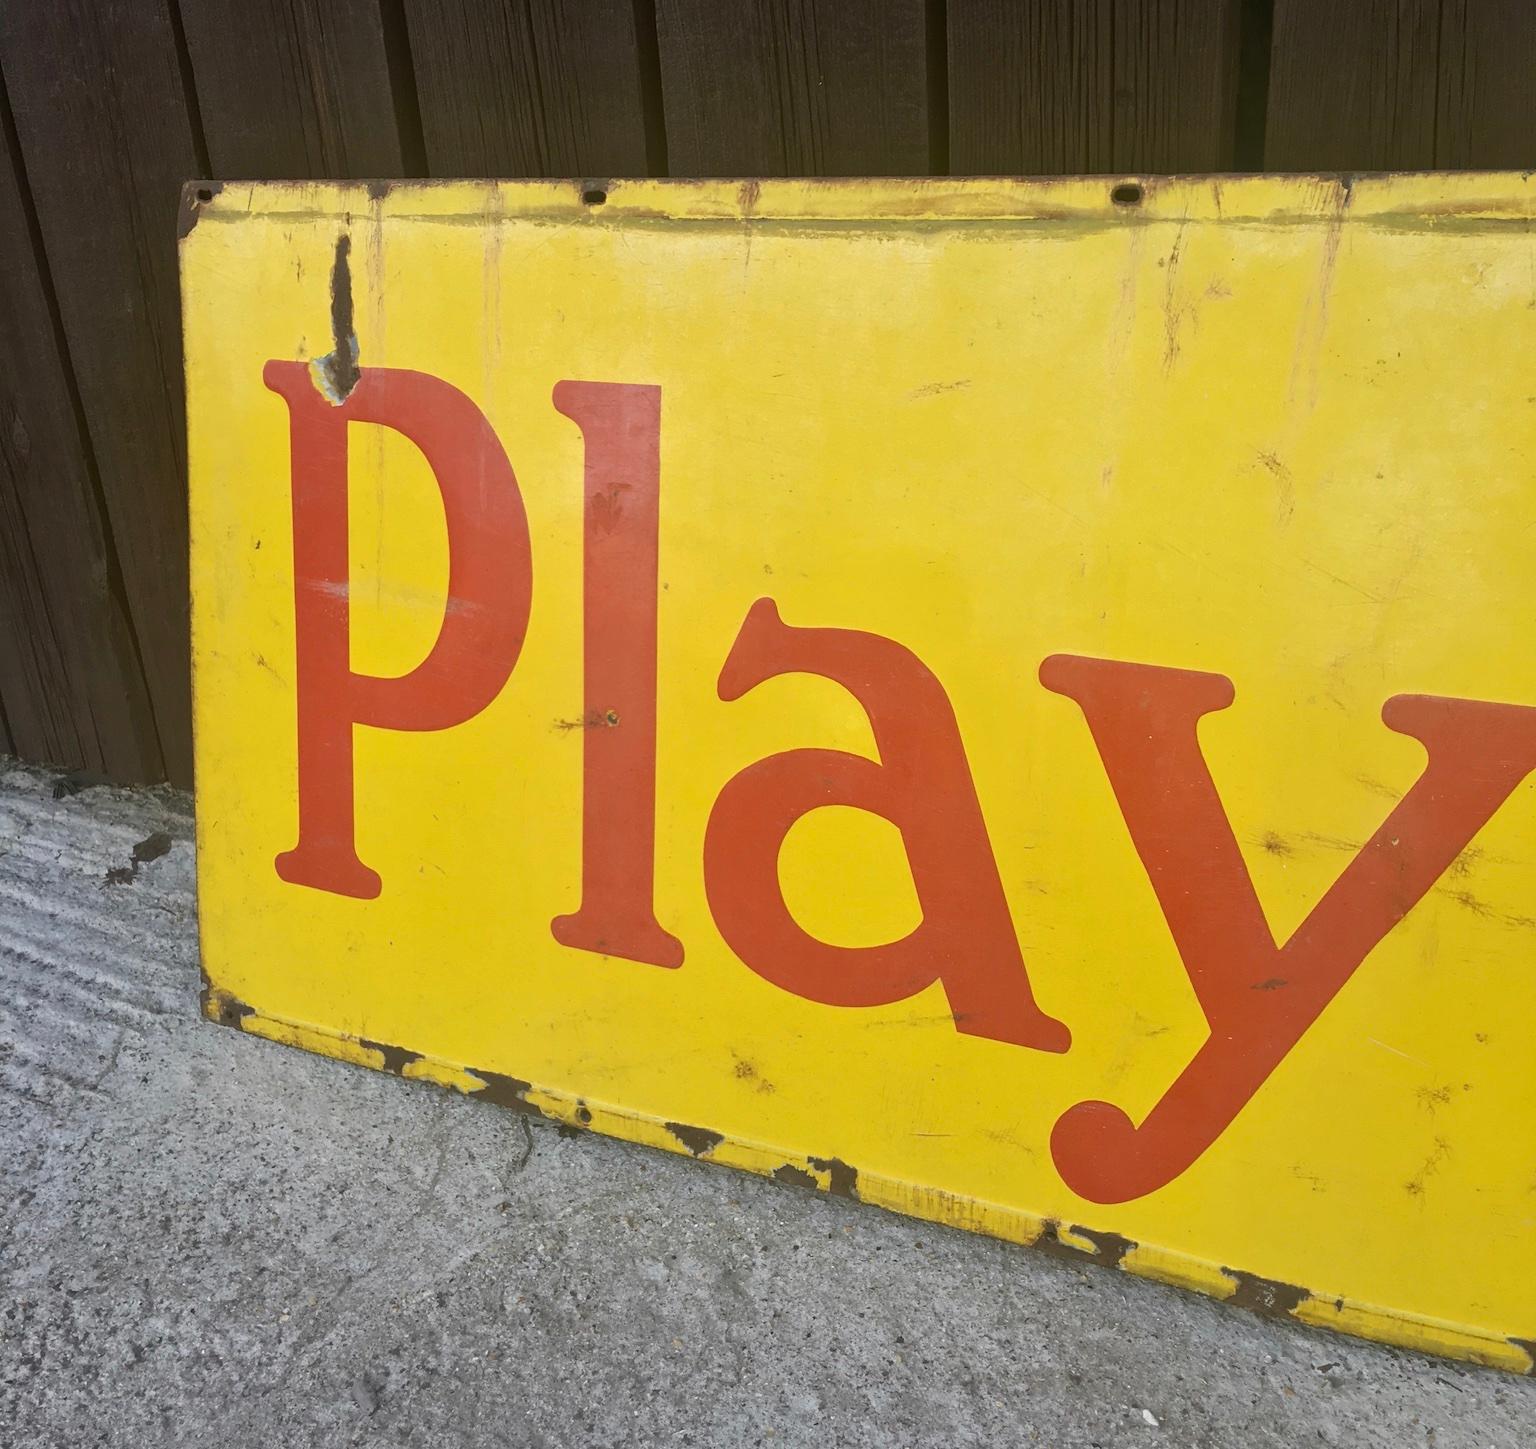 Mid-Century Modern Large Enamel Advertising Sign for Player’s Tobacco, 1950 For Sale